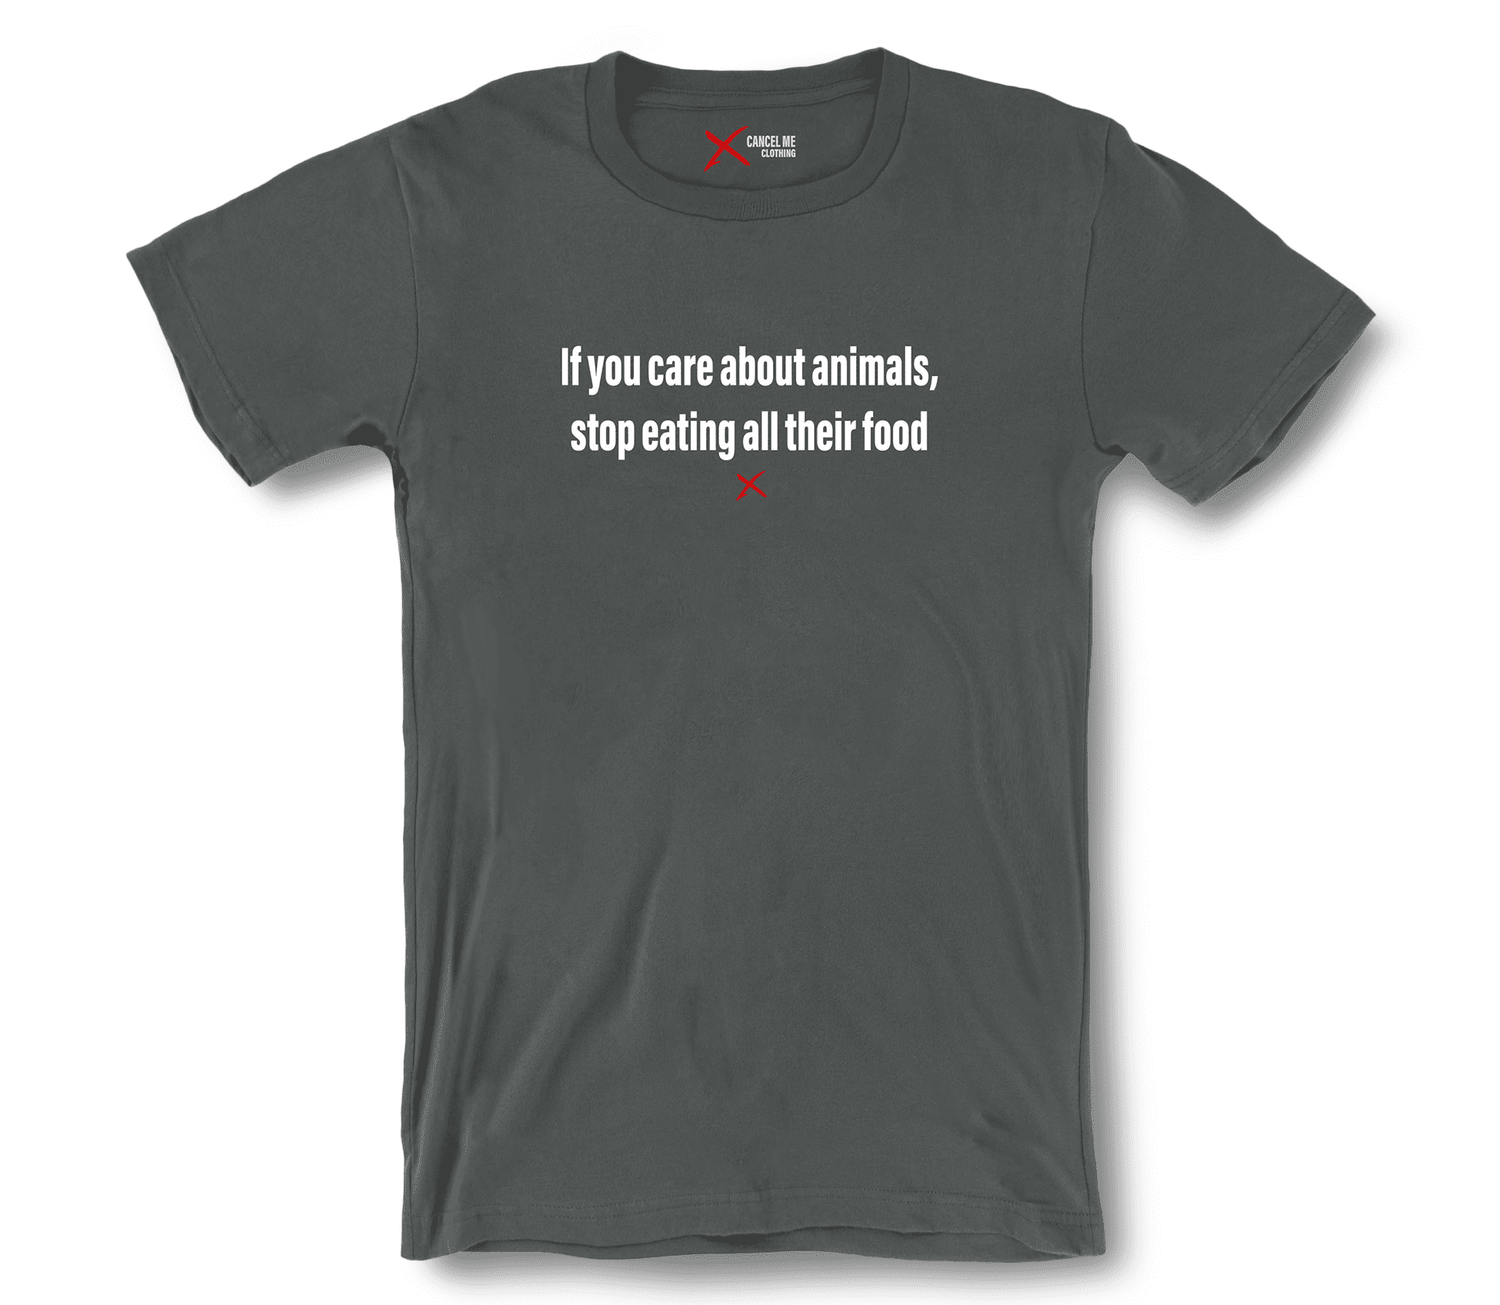 lp-pets_animals_1-shirt_7791828533418_if-you-care-about-animals-stop-eating-all-their-food-shirt_Asphalt.png